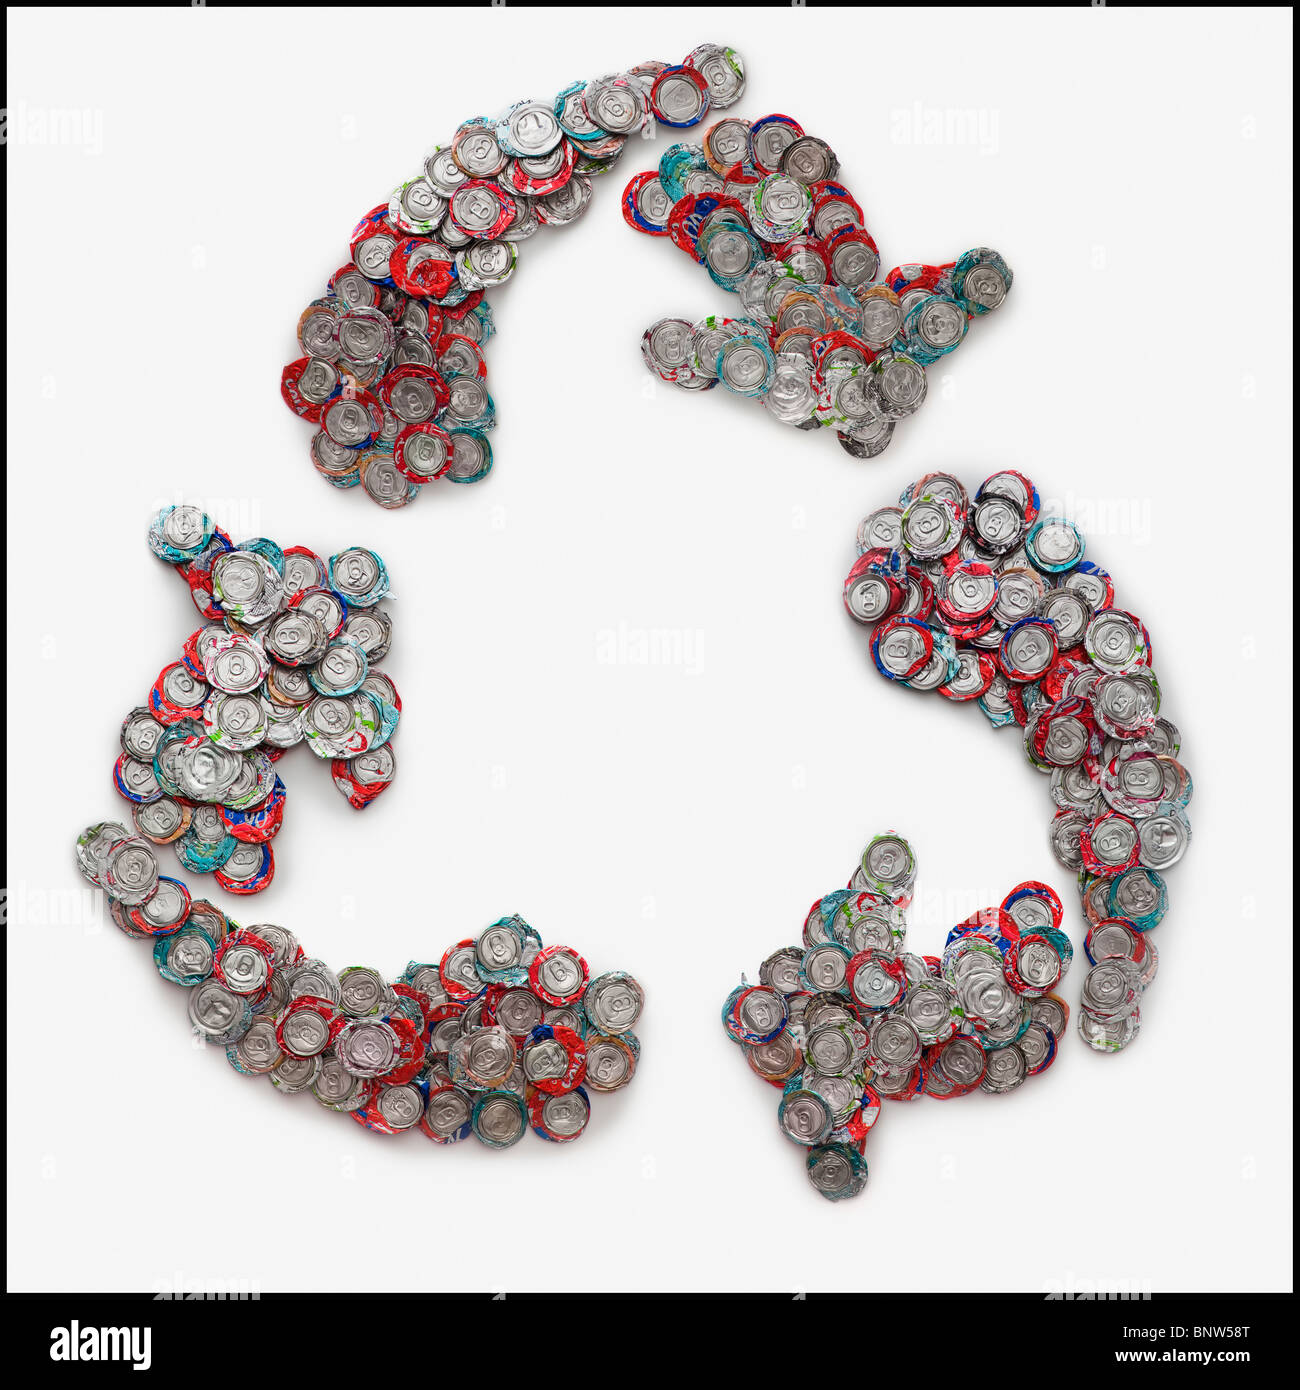 Crushed can arranged in the shape of recycle symbol Stock Photo